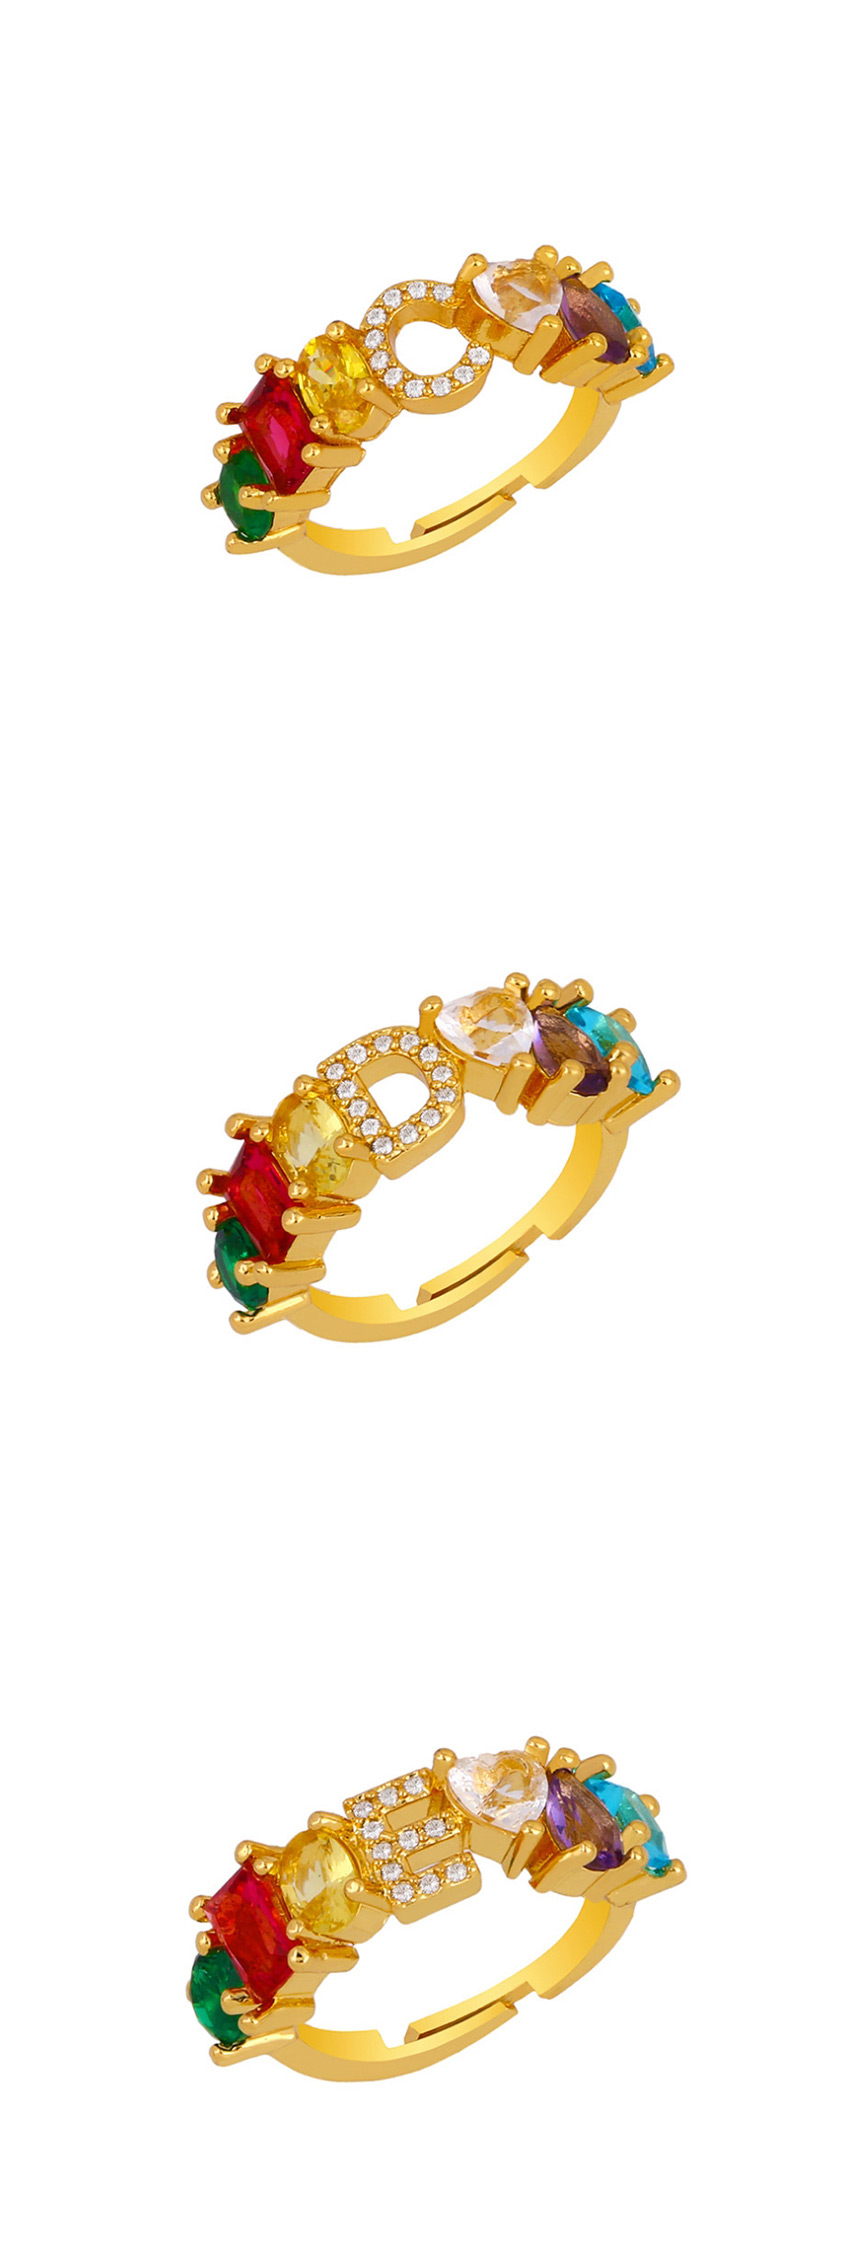 Fashion O Gold Heart-shaped Adjustable Ring With Colorful Diamond Letters,Rings